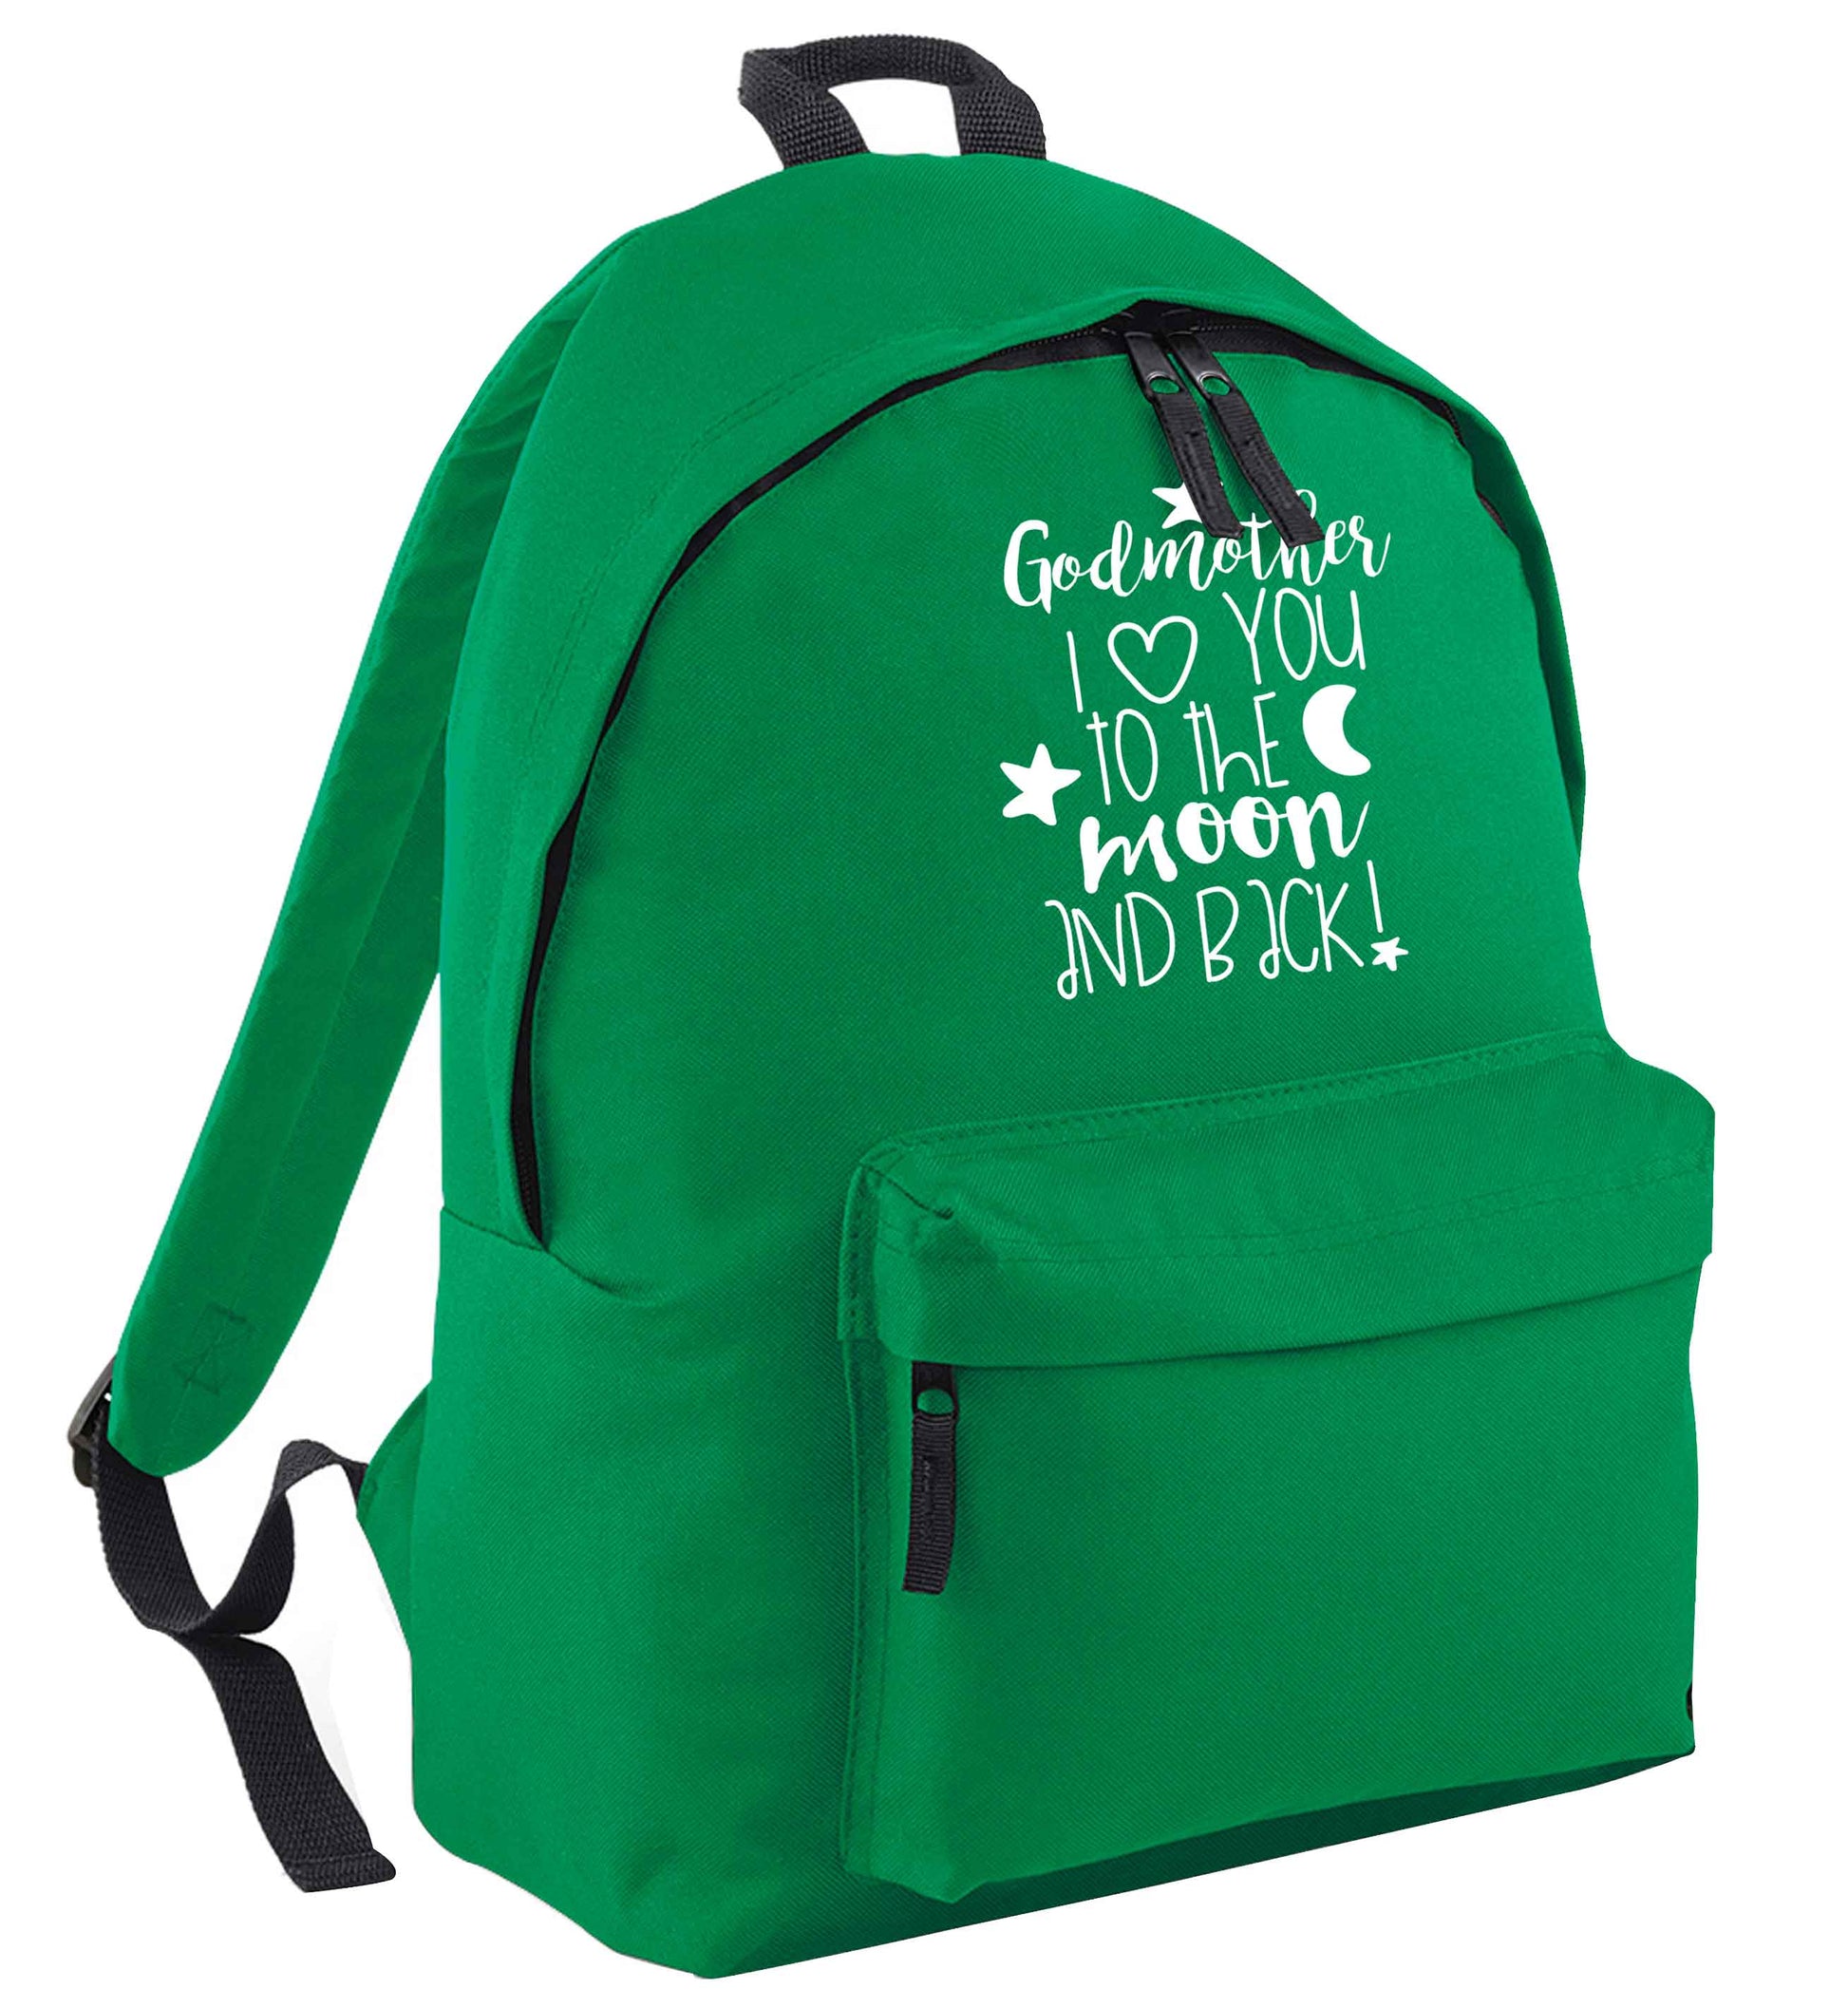 Godmother I love you to the moon and back green adults backpack